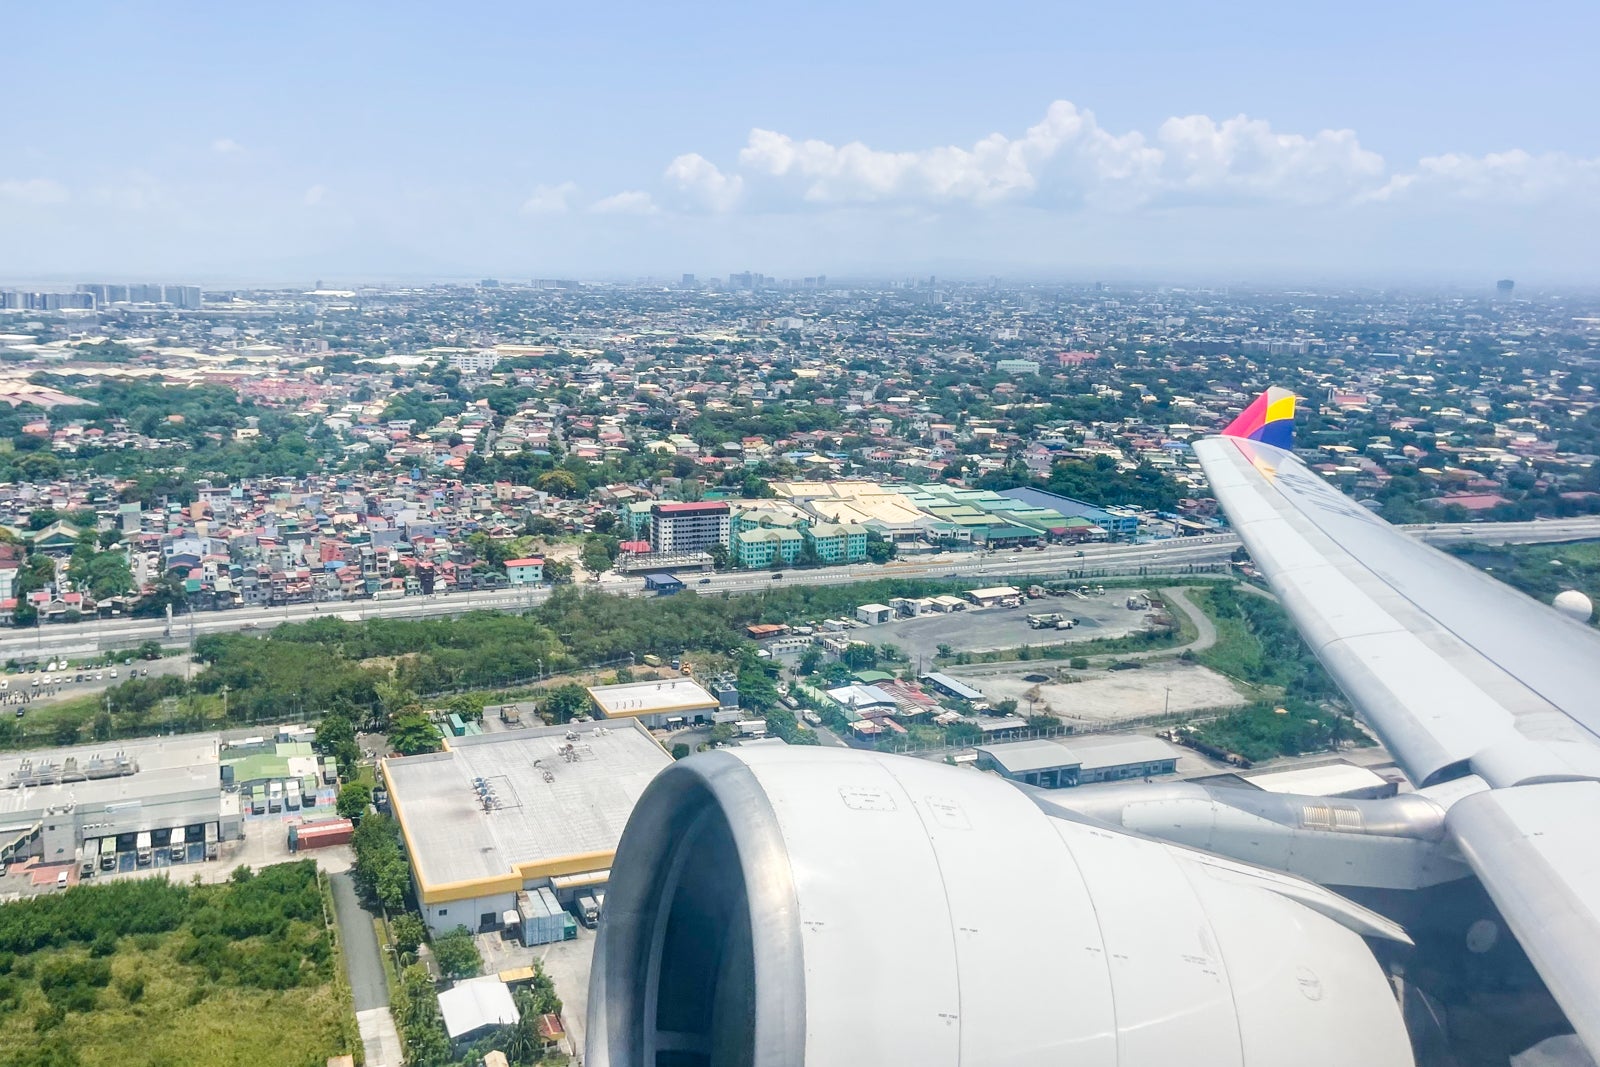 Asiana Airlines Airbus A330 departing MNL